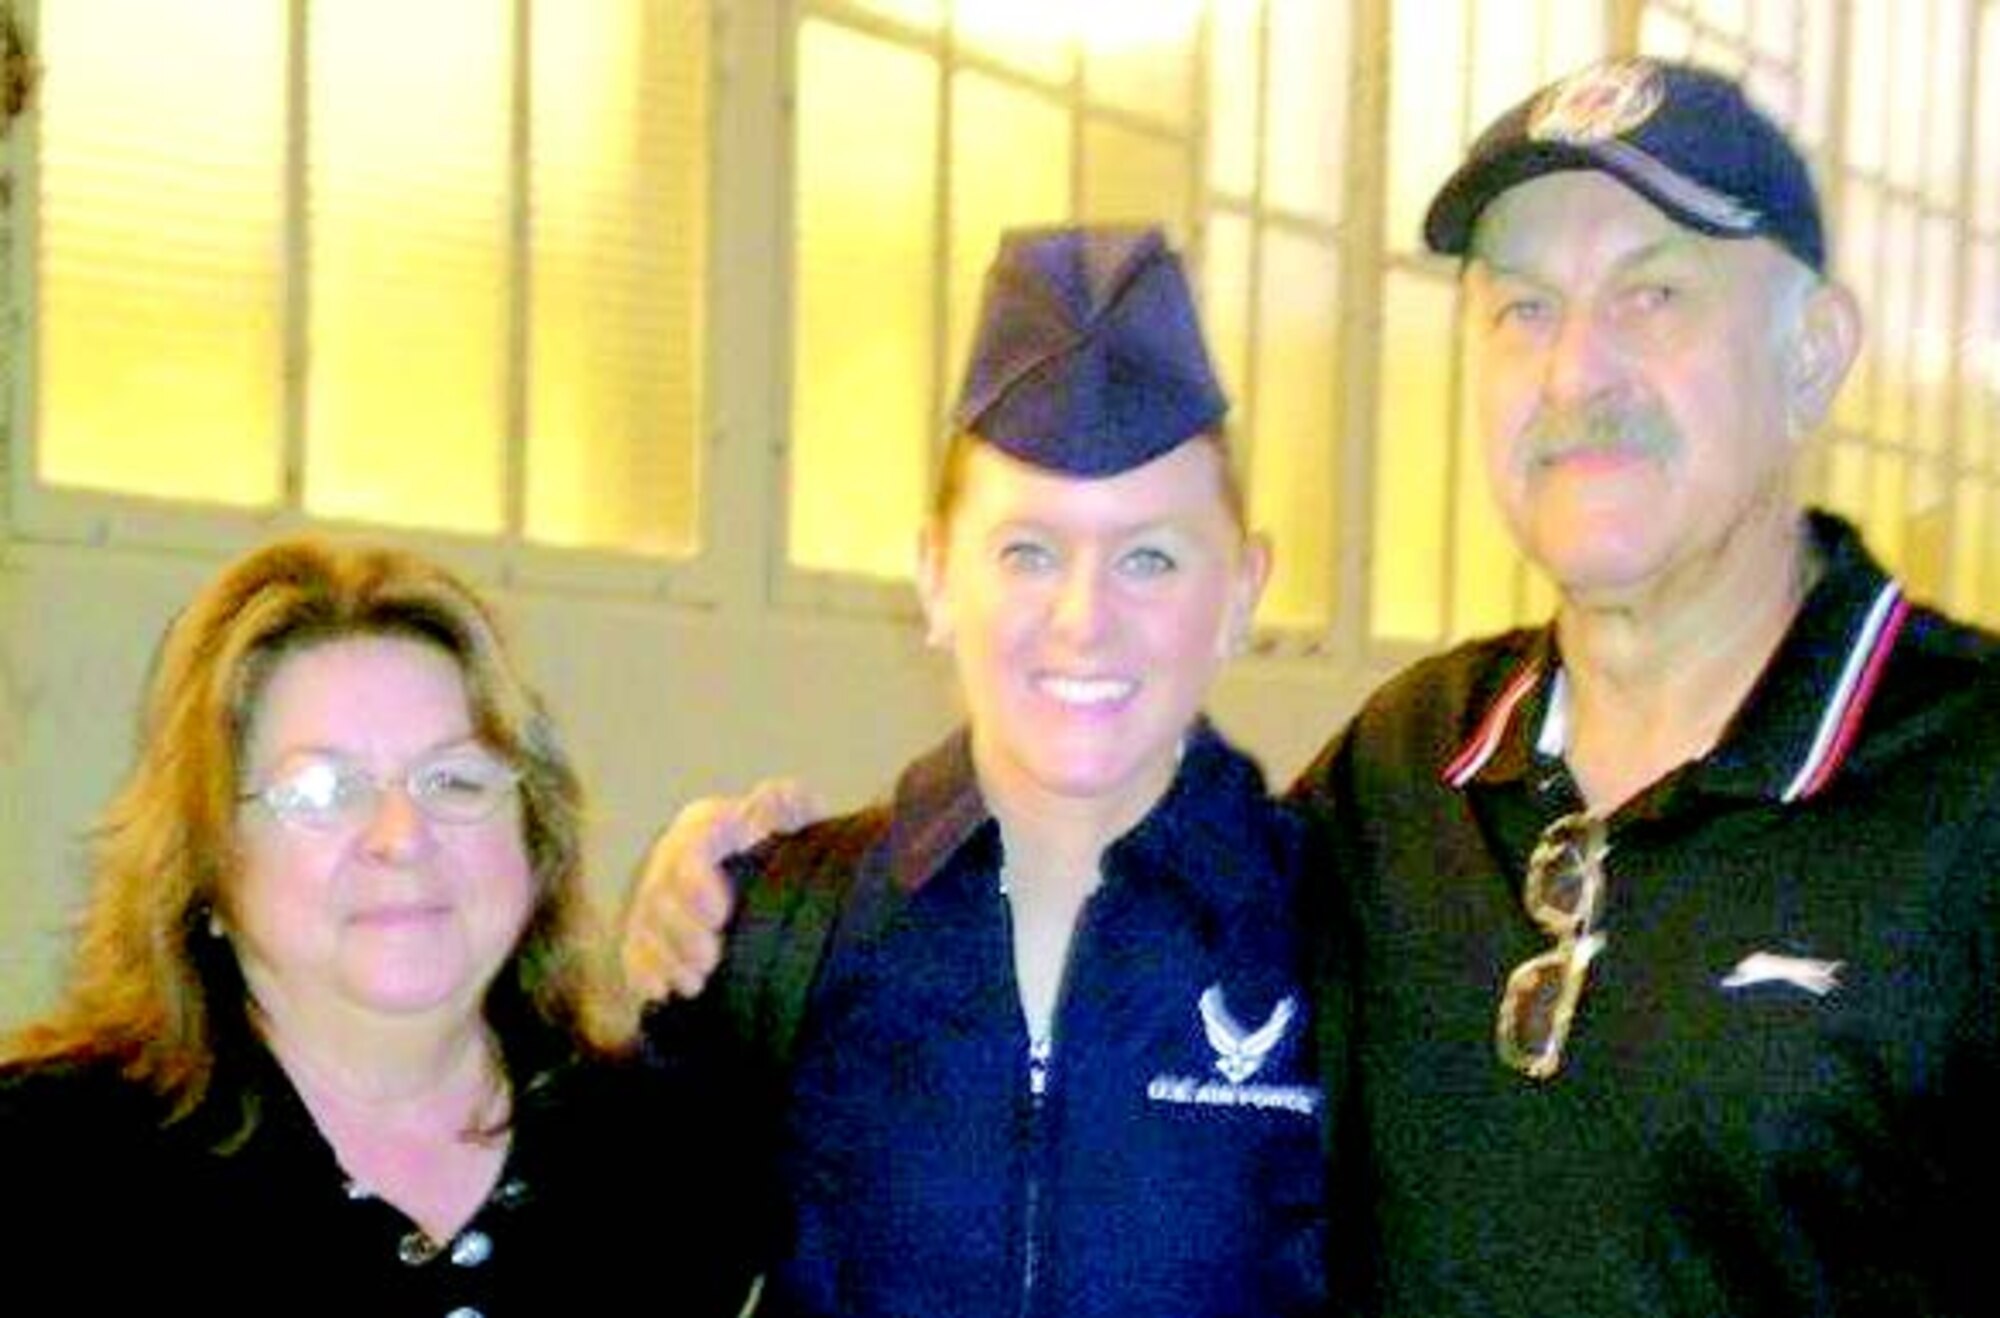 Kristie Volchko flanked by her mom, Carole (L), and her dad, Ronald, following her graduation from training in Wichita Falls, TX.
